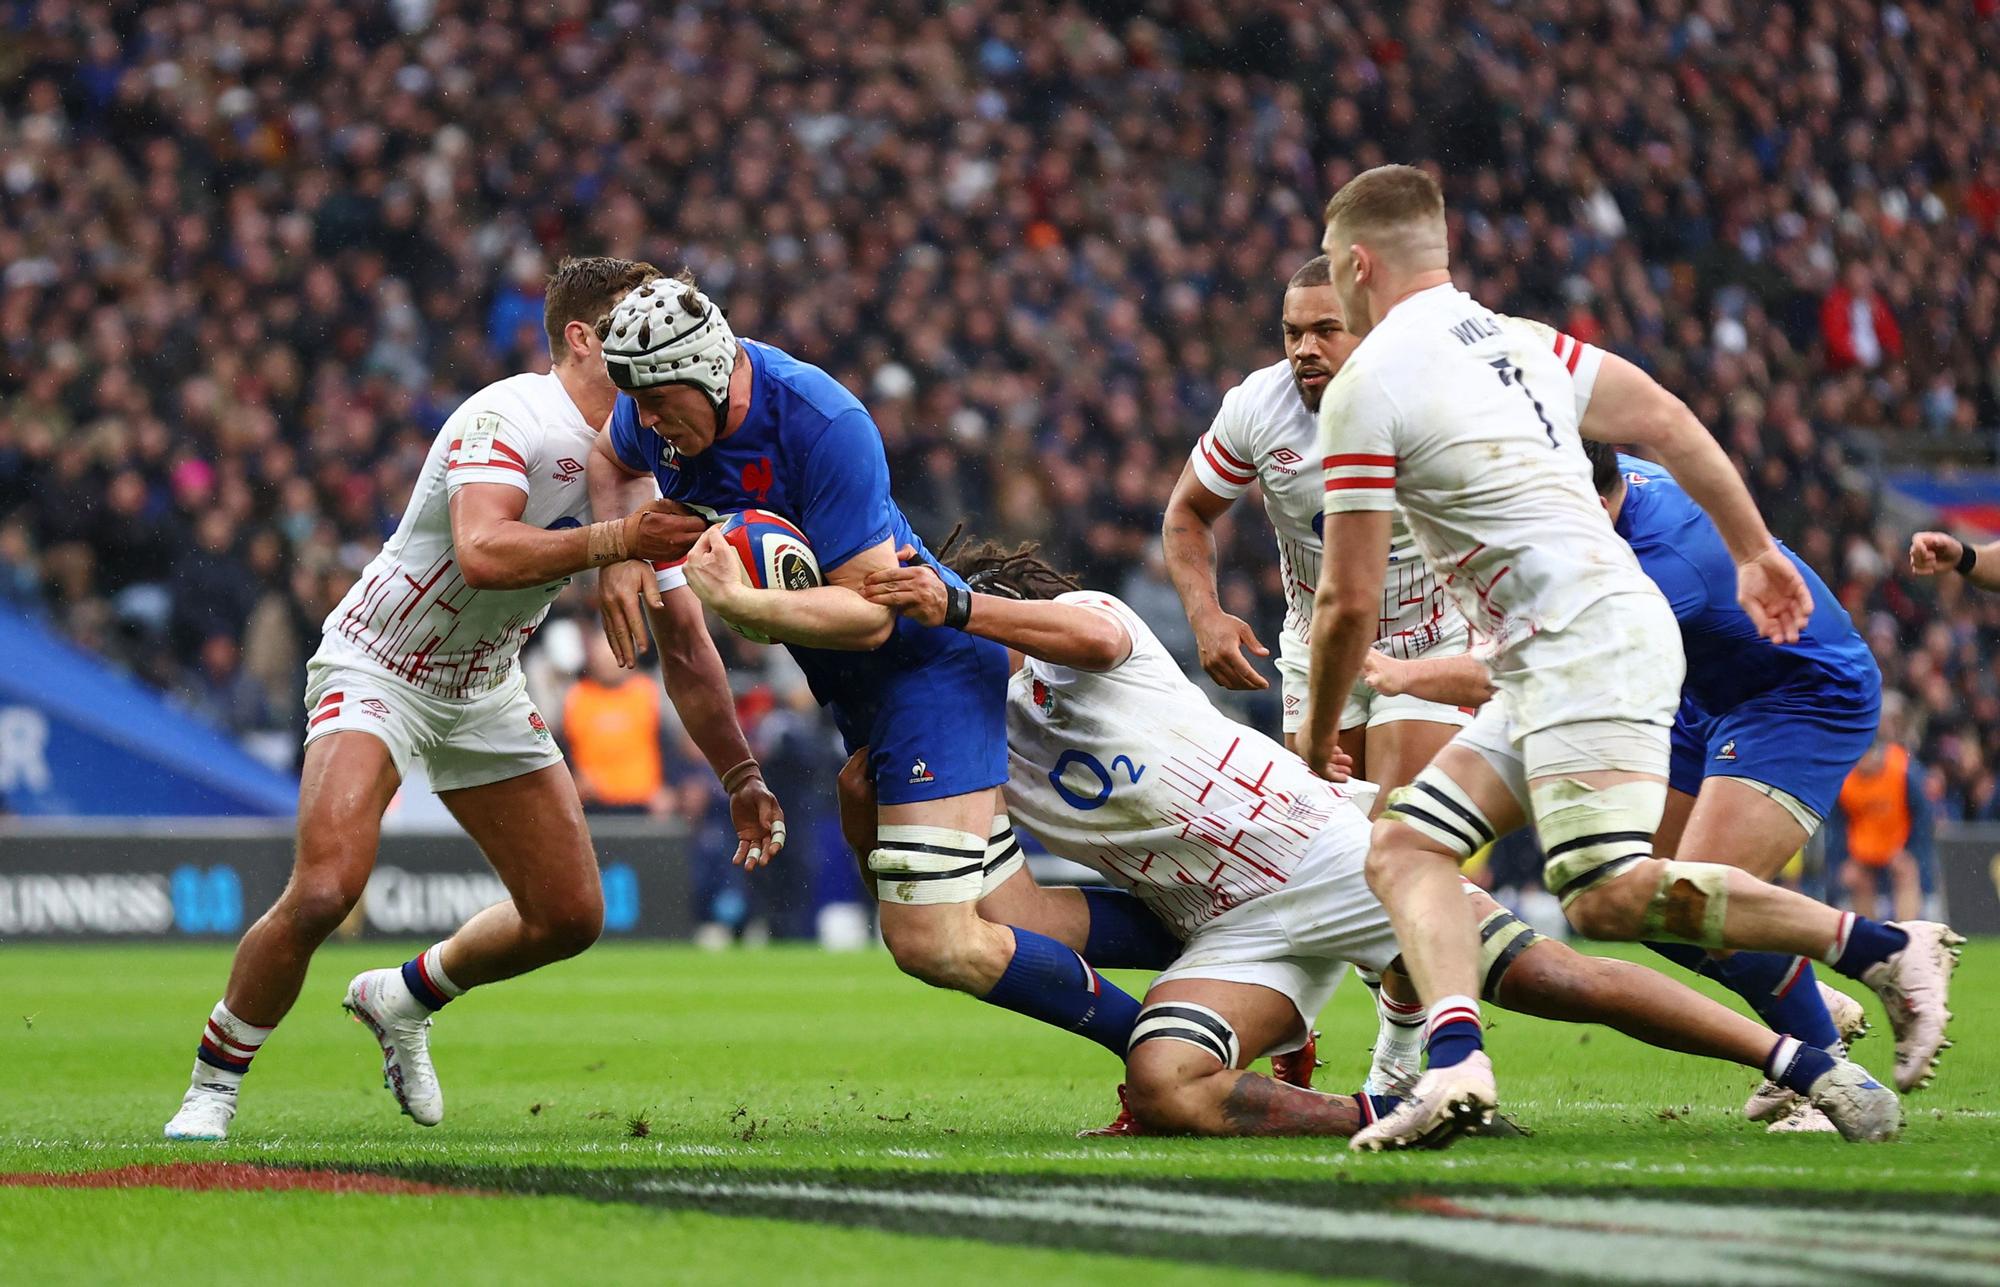 RUGBY-UNION-NATIONS-ENG-FRA/